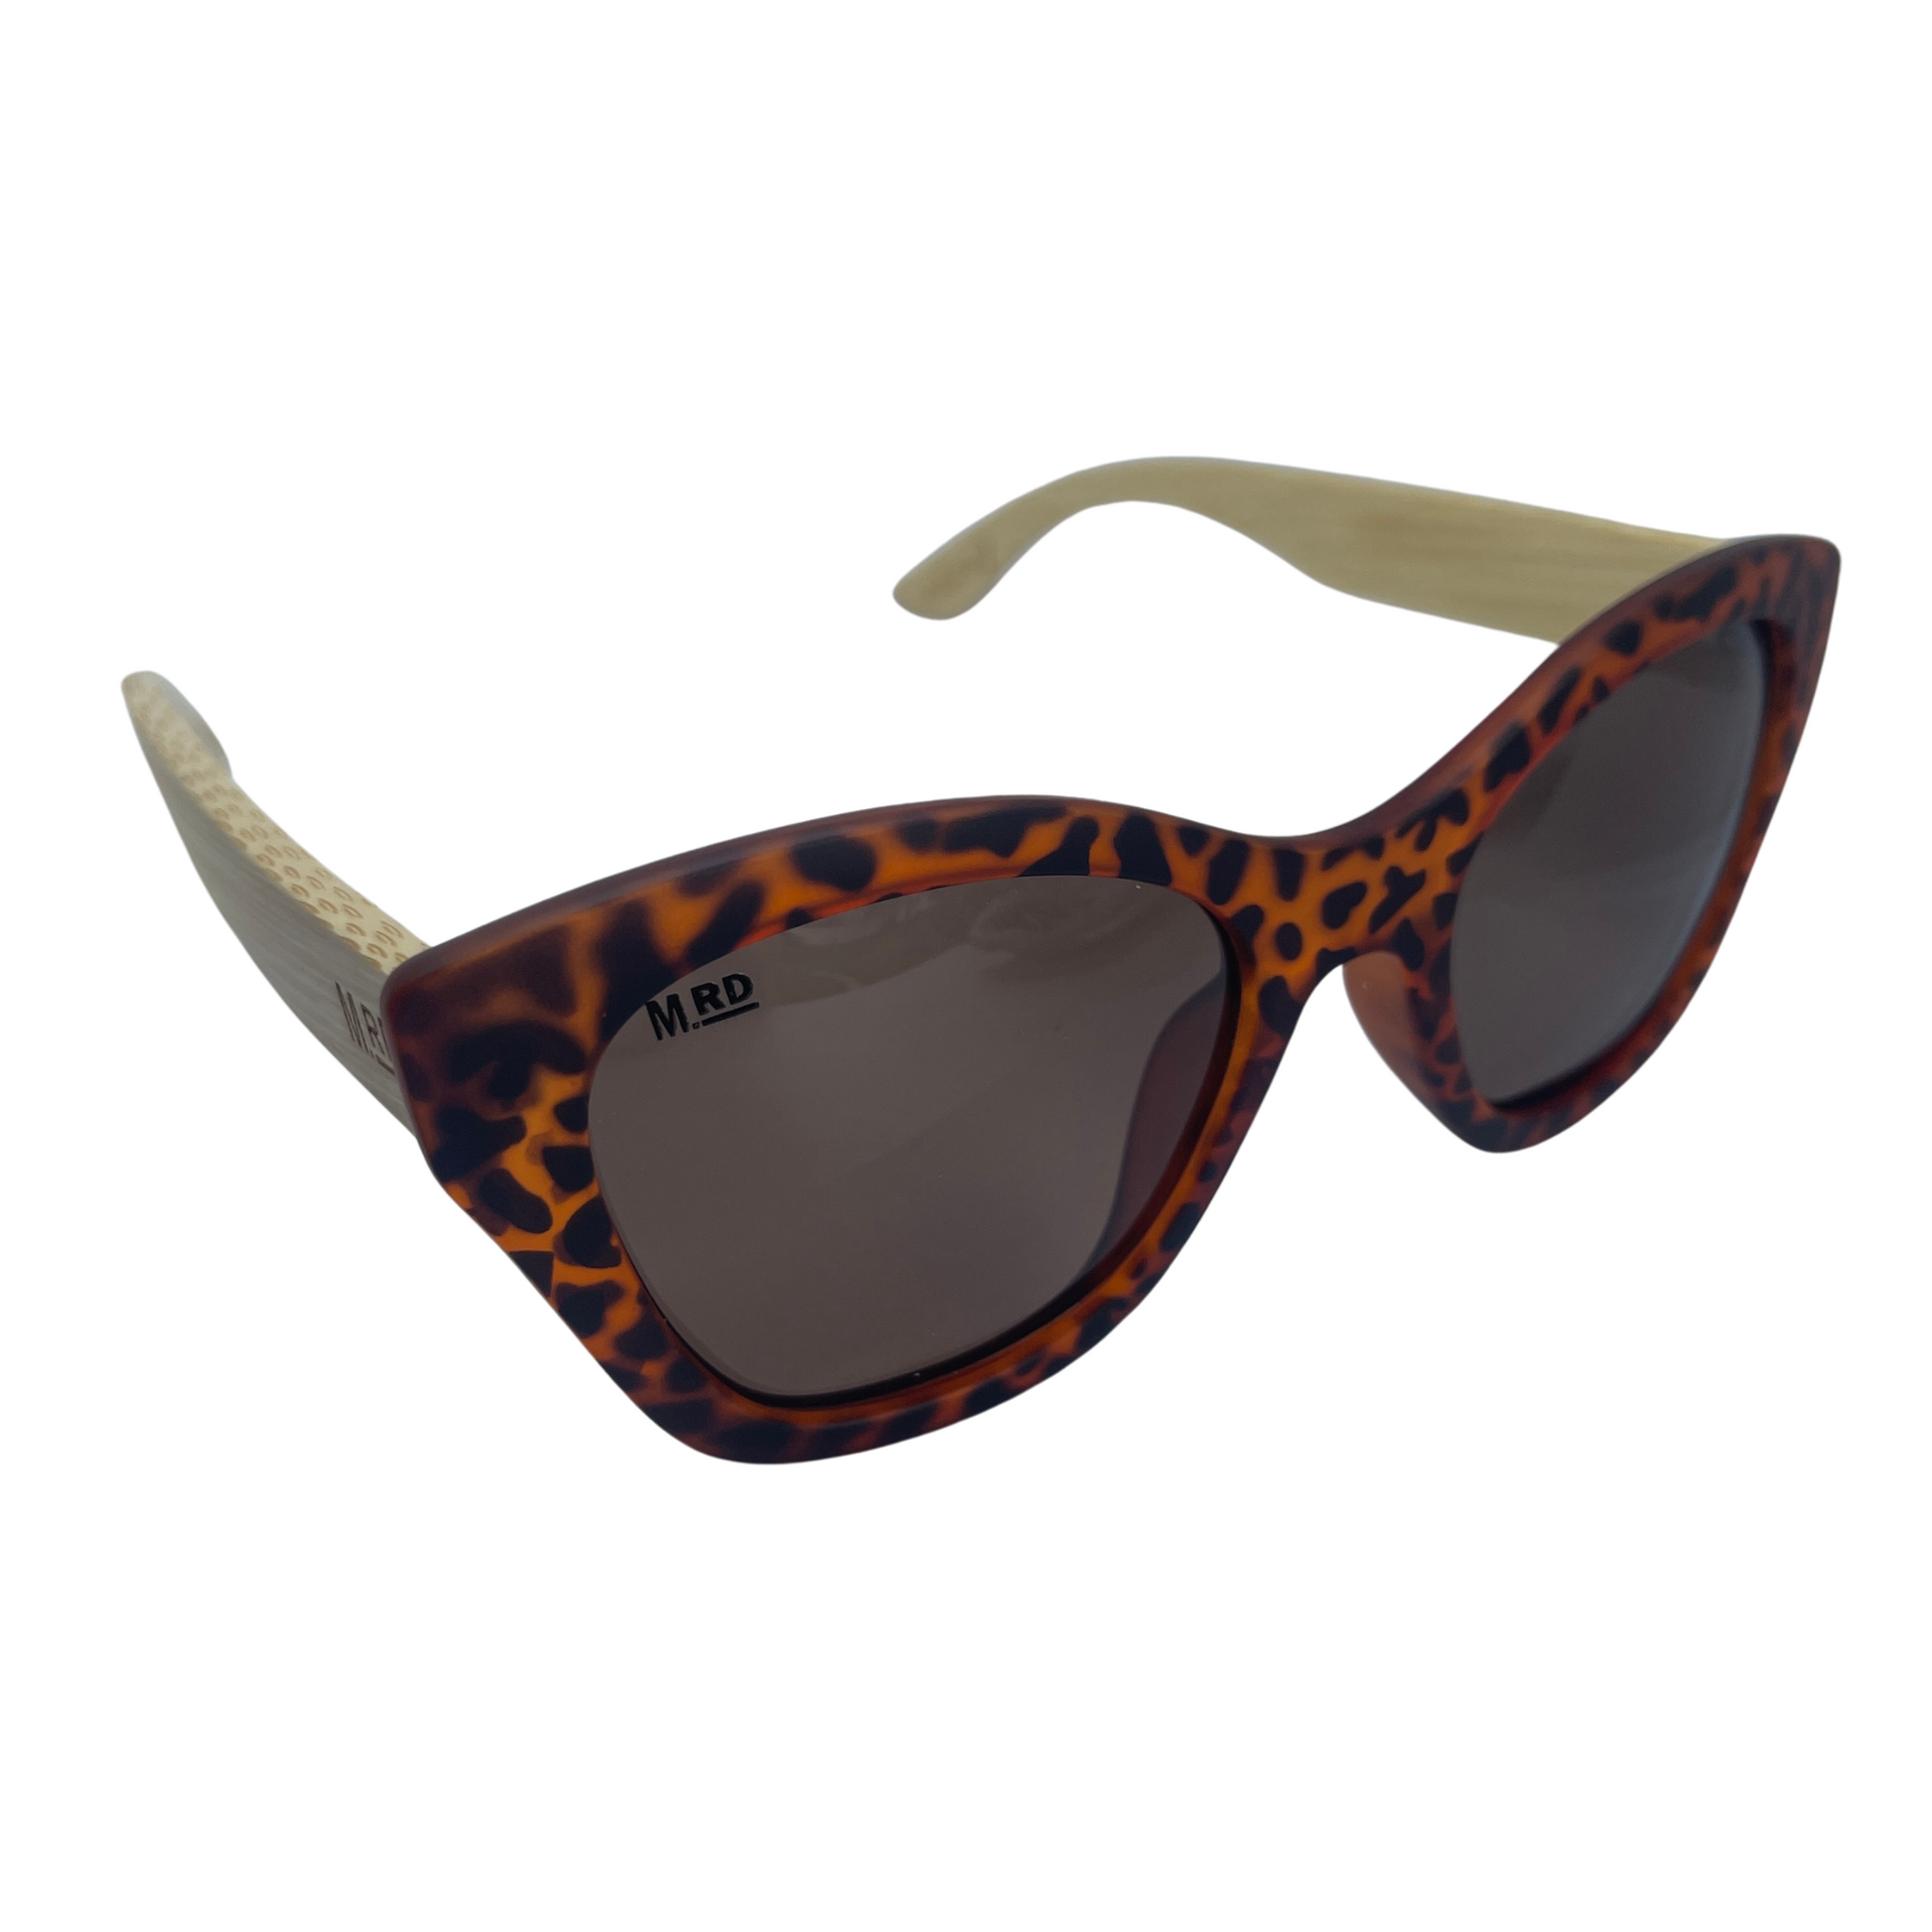 Womens sunglasses with tortoiseshell frame and bamboo arms.